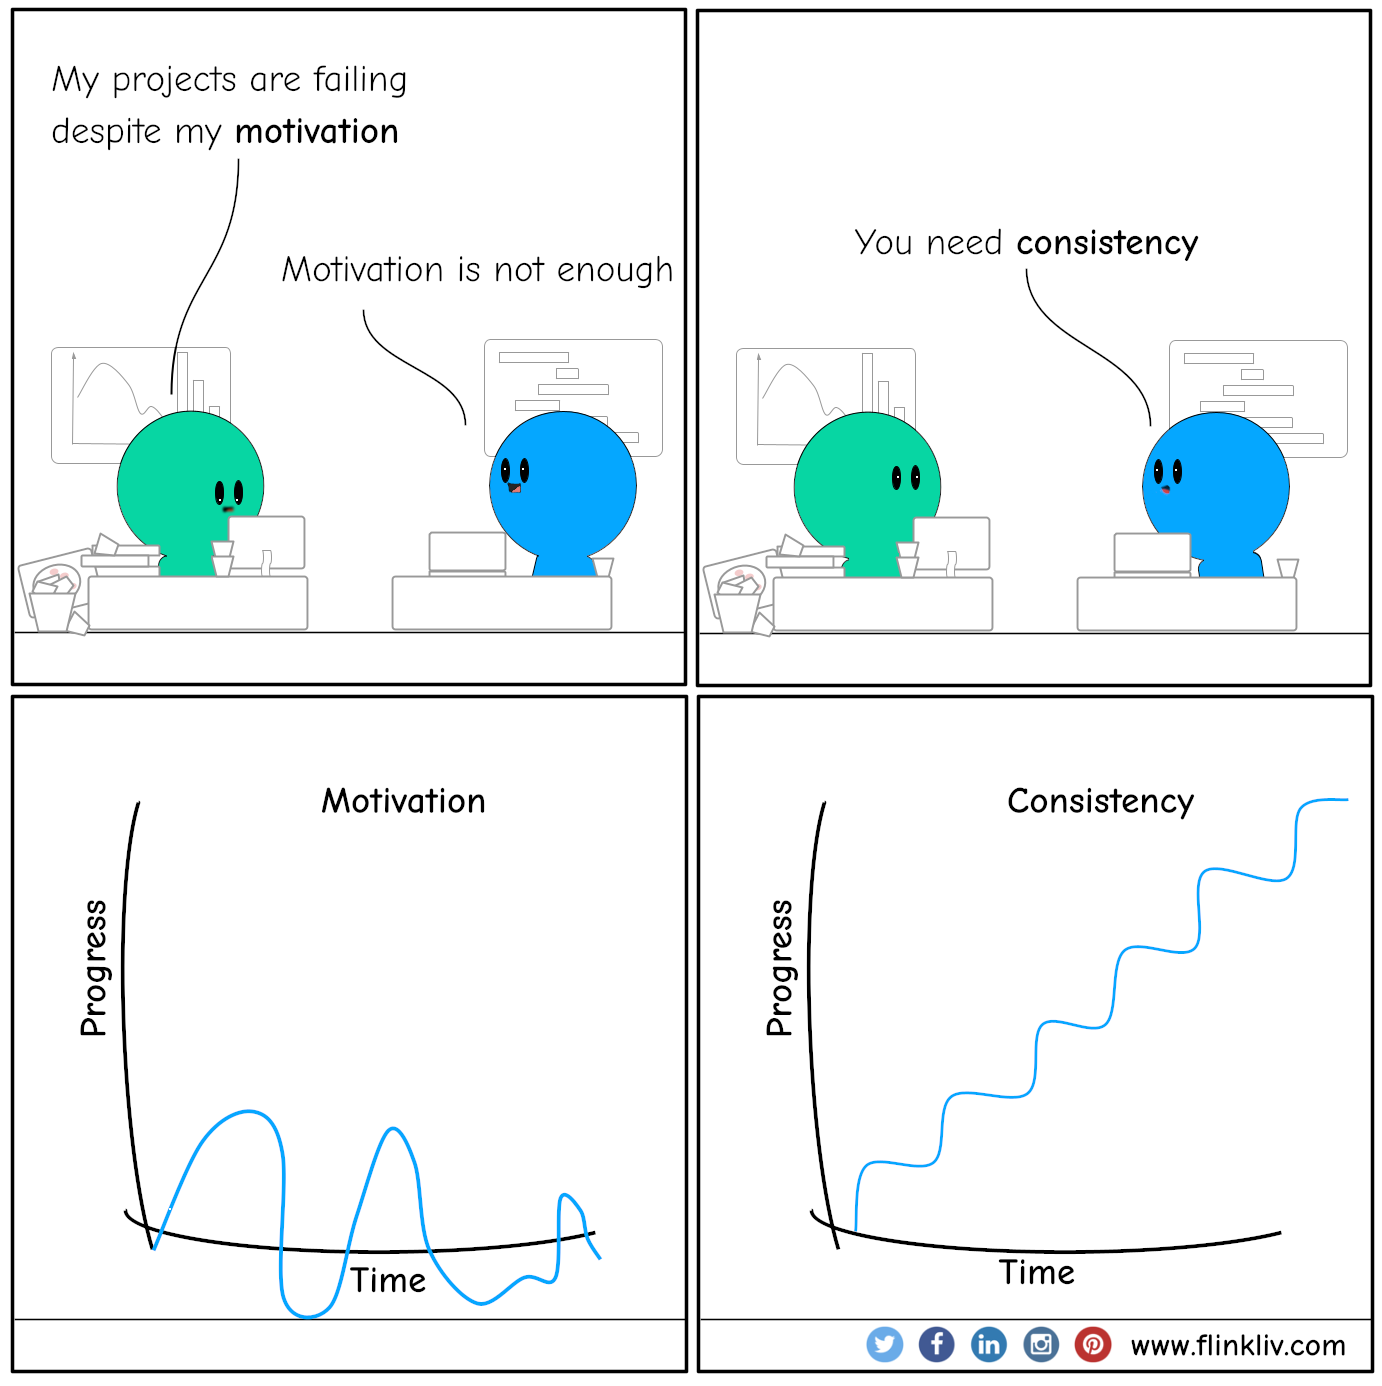 Conversation between A and B about Motivation vs consistency.
            A: My projects are failing despite my motivation
            B: Motivation is not enough.
            B: You need consistency.            
              